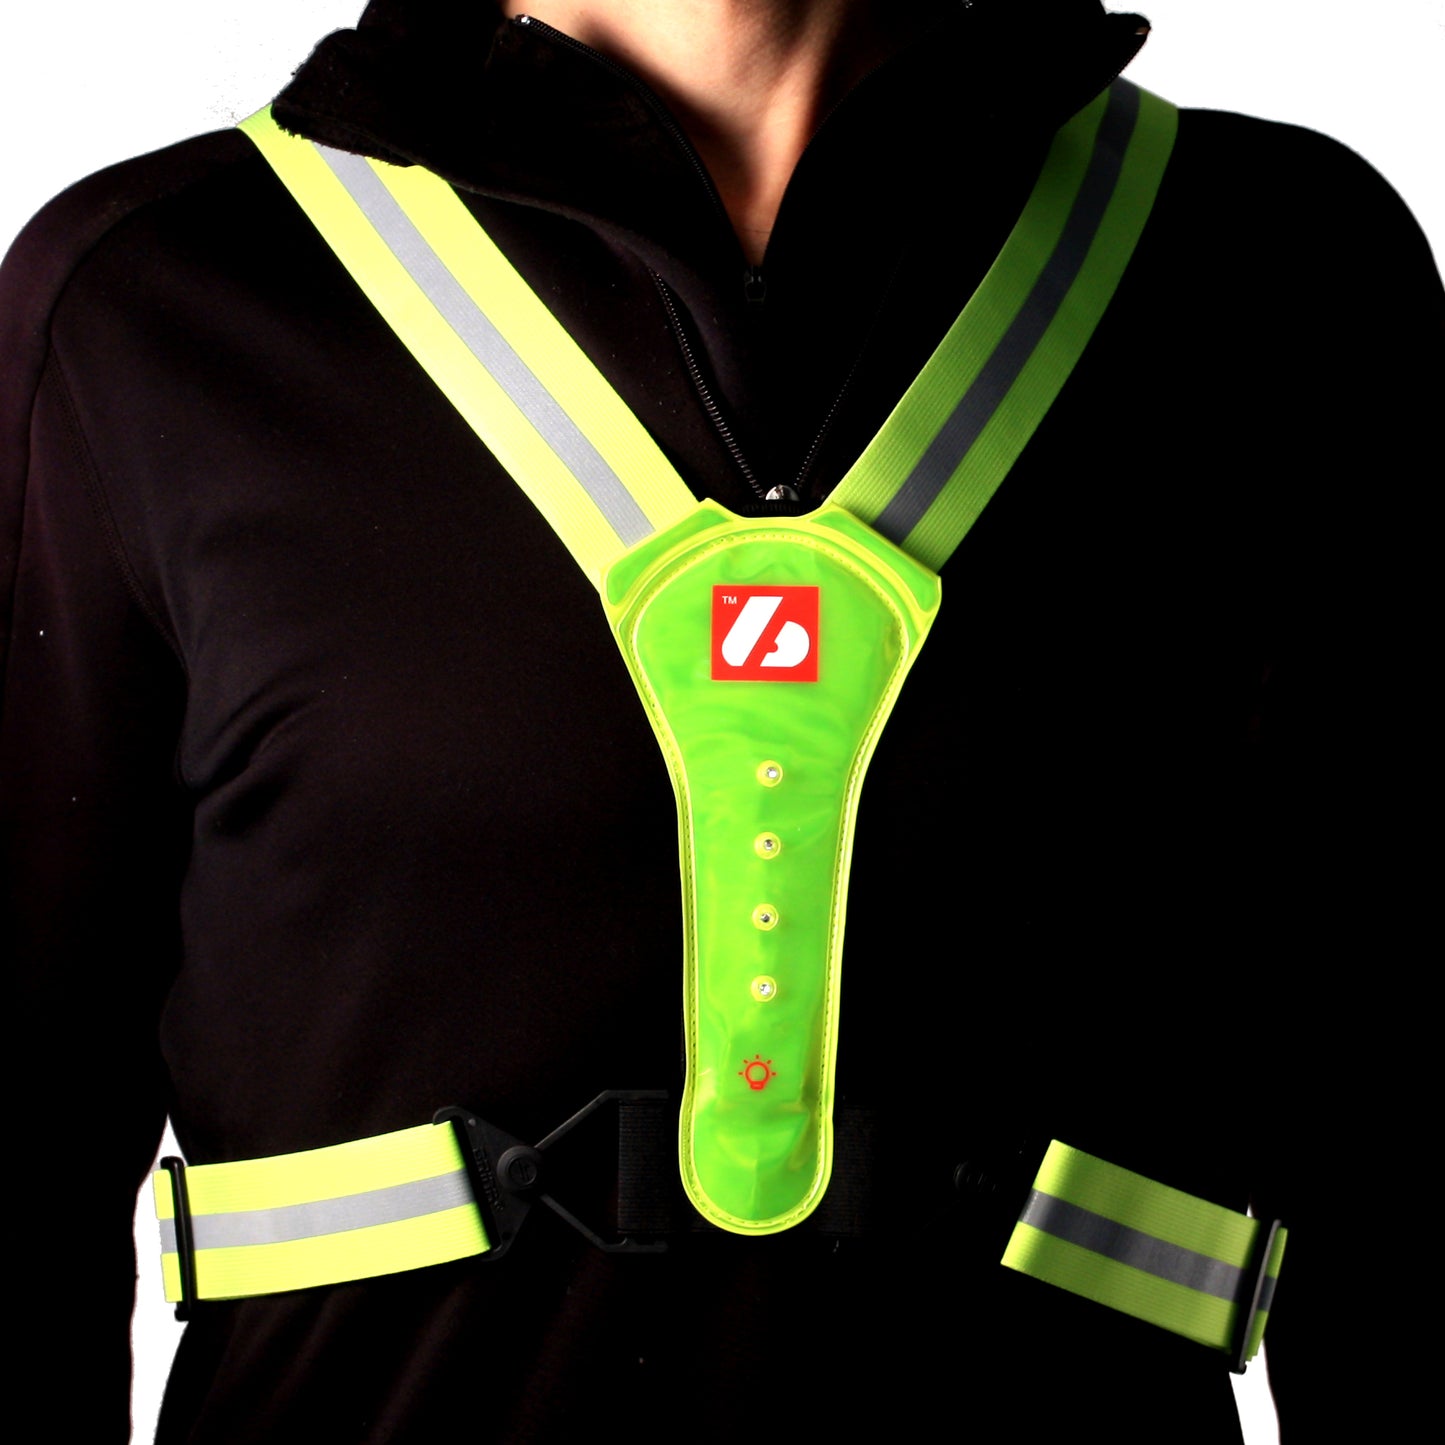 LW-1 Fluorescent vest with LED lights and reflective stripes